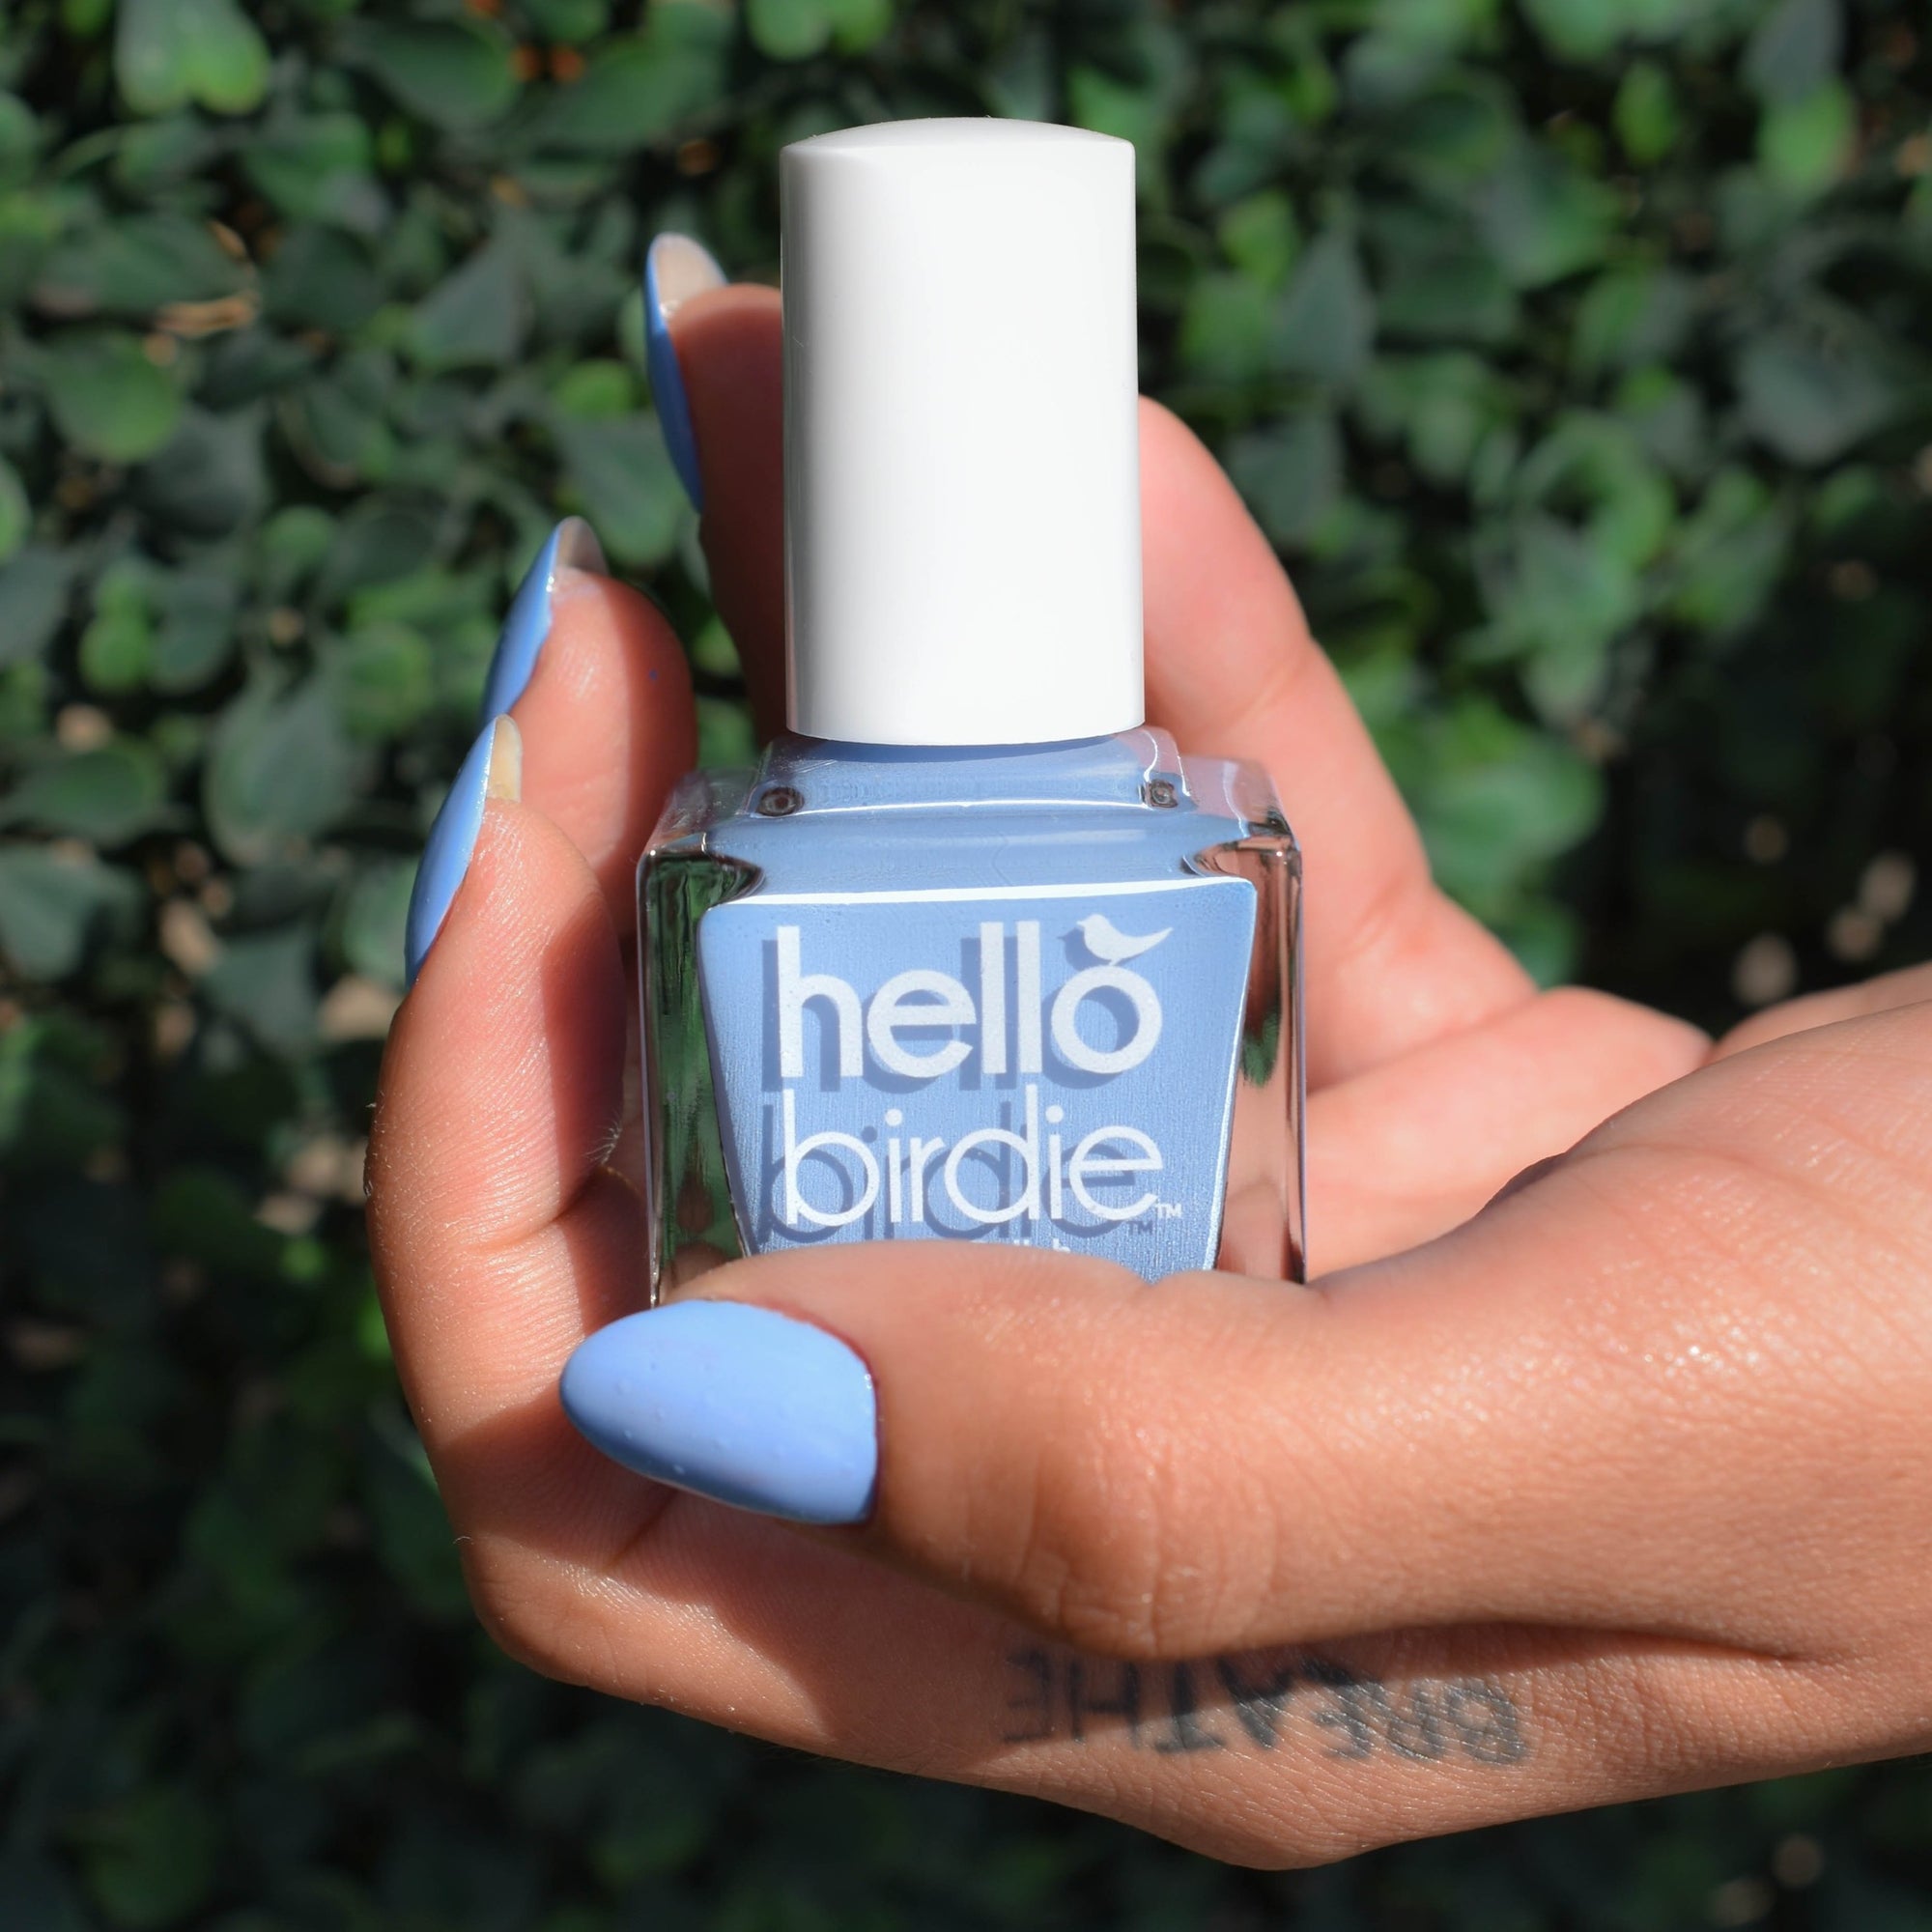 A close up of medium toned hand holding a bottle of So Fly nail polish from Hello Birdie which is a bright sky blue hue. The nails are painted with the polish and a tattoo saying "breathe" is revealed on the side of the hand. The background is an out of focus ivy wall.